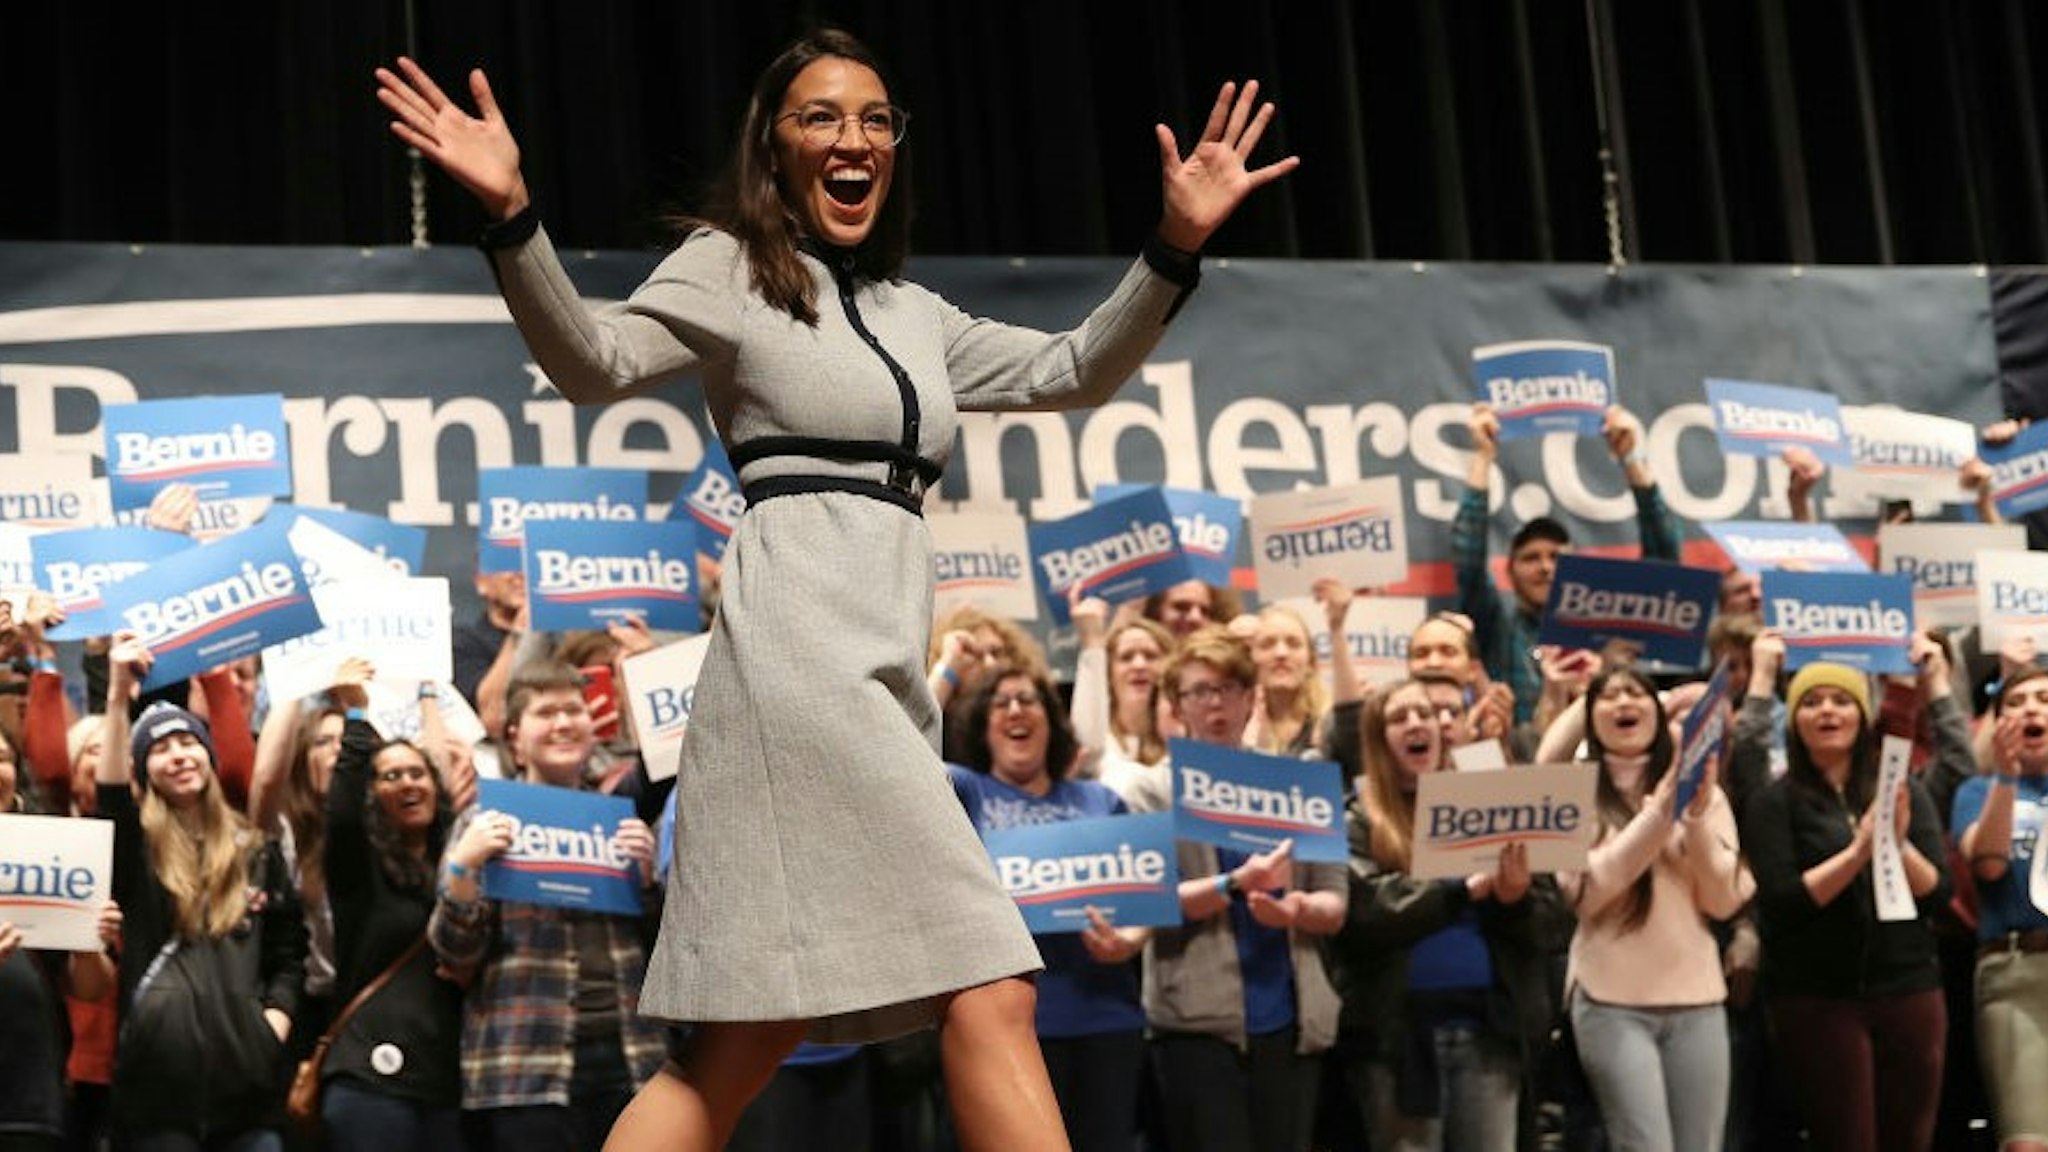 AMES, IOWA - JANUARY 25: Rep. Alexandria Ocasio-Cortez (D-NY) arrives on stage at a campaign event for Democratic presidential candidate Sen. Bernie Sanders (I-VT) at the Ames City Auditorium on January 25, 2020 in Ames, Iowa. Iowa holds the state's caucuses in nine days on February 3. (Photo by